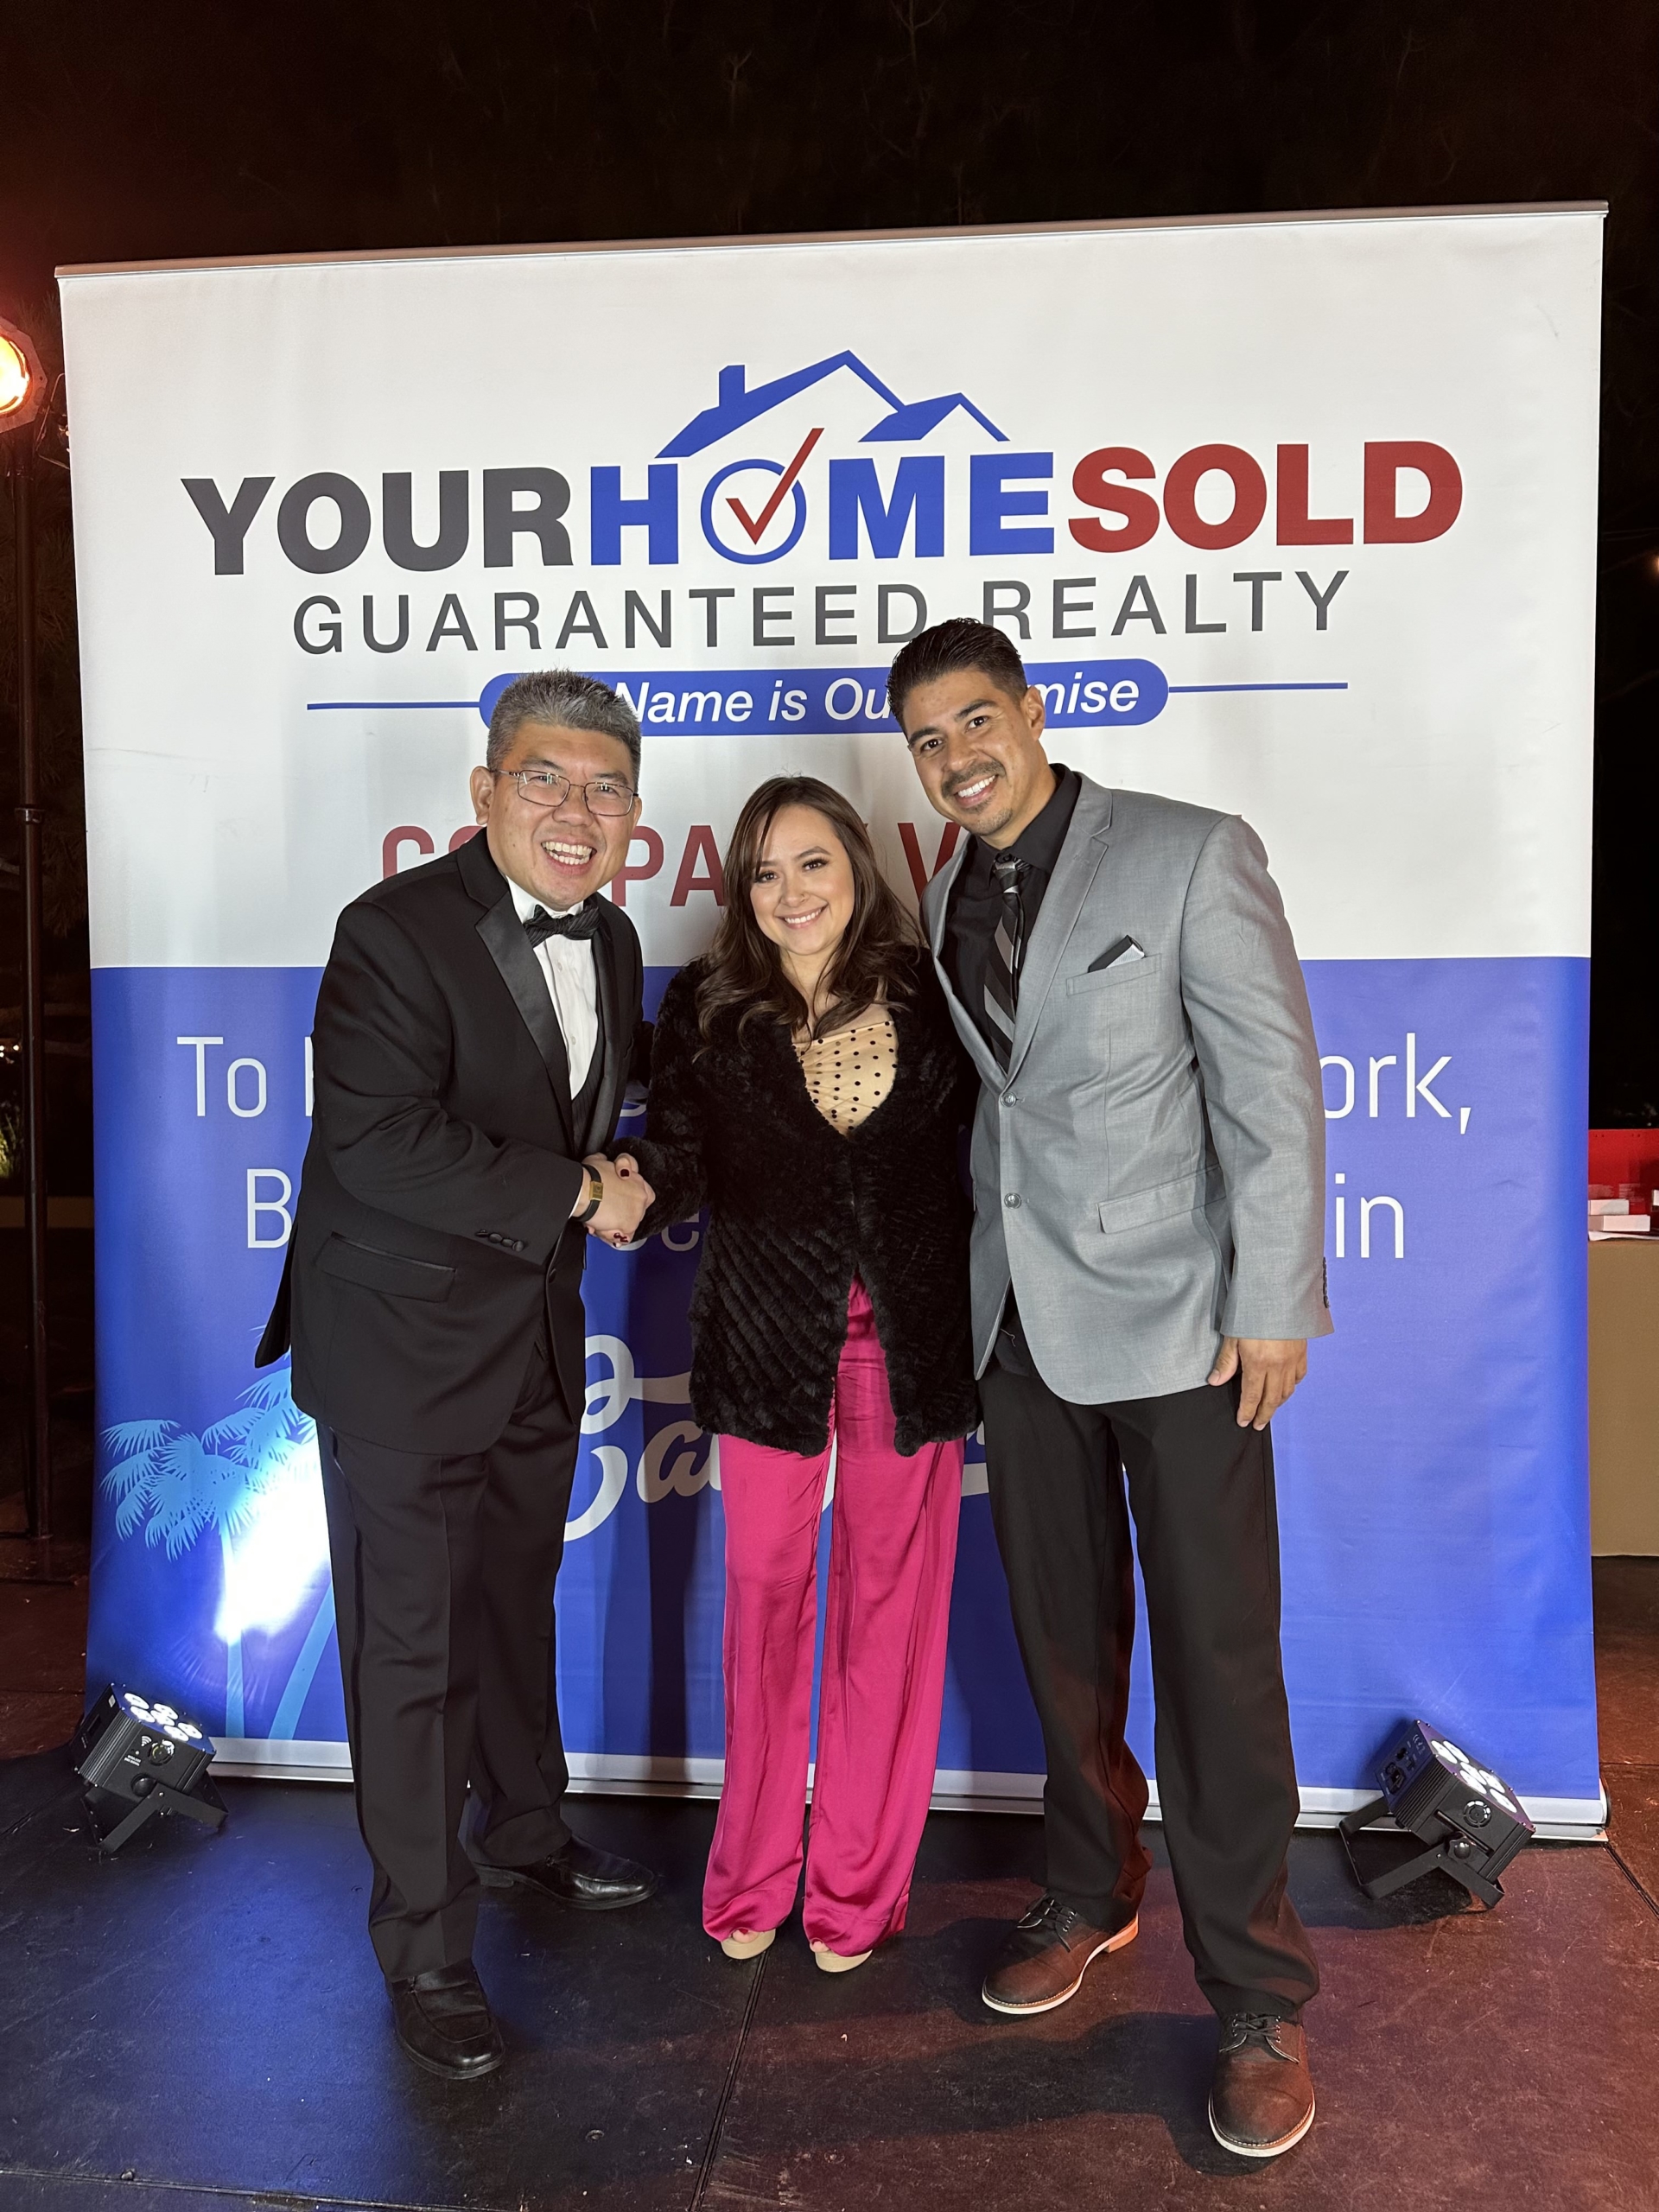 Stay-At-Home-Mom-Nataly-Morfin-fulfills-her-dream-of-becoming-a-real-estate-associate-by-joining-Your-Home-Sold-Guaranteed-Realty-1-scaled.jpg